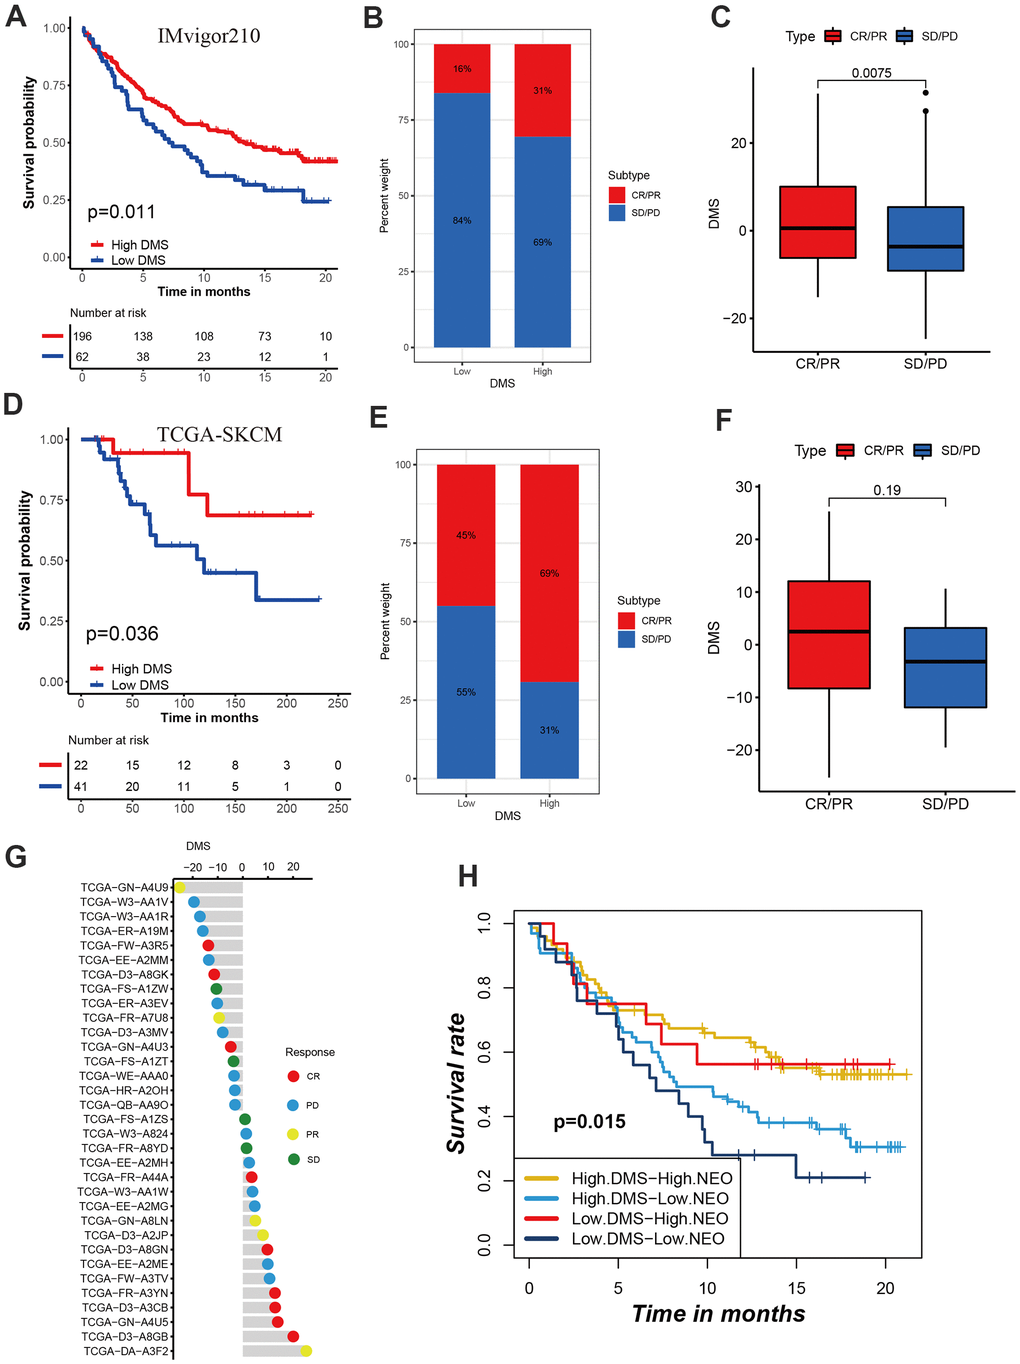 Role of DMS in predicting efficacy of immunotherapy. (A) Kaplan-Meier curves displaying the survival difference of high and low DMS groups in IMvigor210 cohort. (B) The ratio of clinical response types in high DMS and low DMS groups in the IMvigor210 cohort when treated with anti-PD-1 immunotherapy. (C) Differences in DMS score between different clinical response types in the IMvigor210 cohort. (D) Survival analyses for DMS in TCGA-SKCM cohort. (E) The ratio of clinical response types in each group in the TCGA-SKCM cohort. (F, G) Differences in DMS score between different clinical response types in the TCGA-SKCM cohort. (H) Survival analyses for patients receiving anti-PD-L1 immunotherapy stratified by both neoantigen burden and DMS signature. (I) Differences in DMS score among different immune phenotypes. CR, complete response; PR, partial response; SD, stable disease; PD, progressive disease. NEO, neoantigen burden.